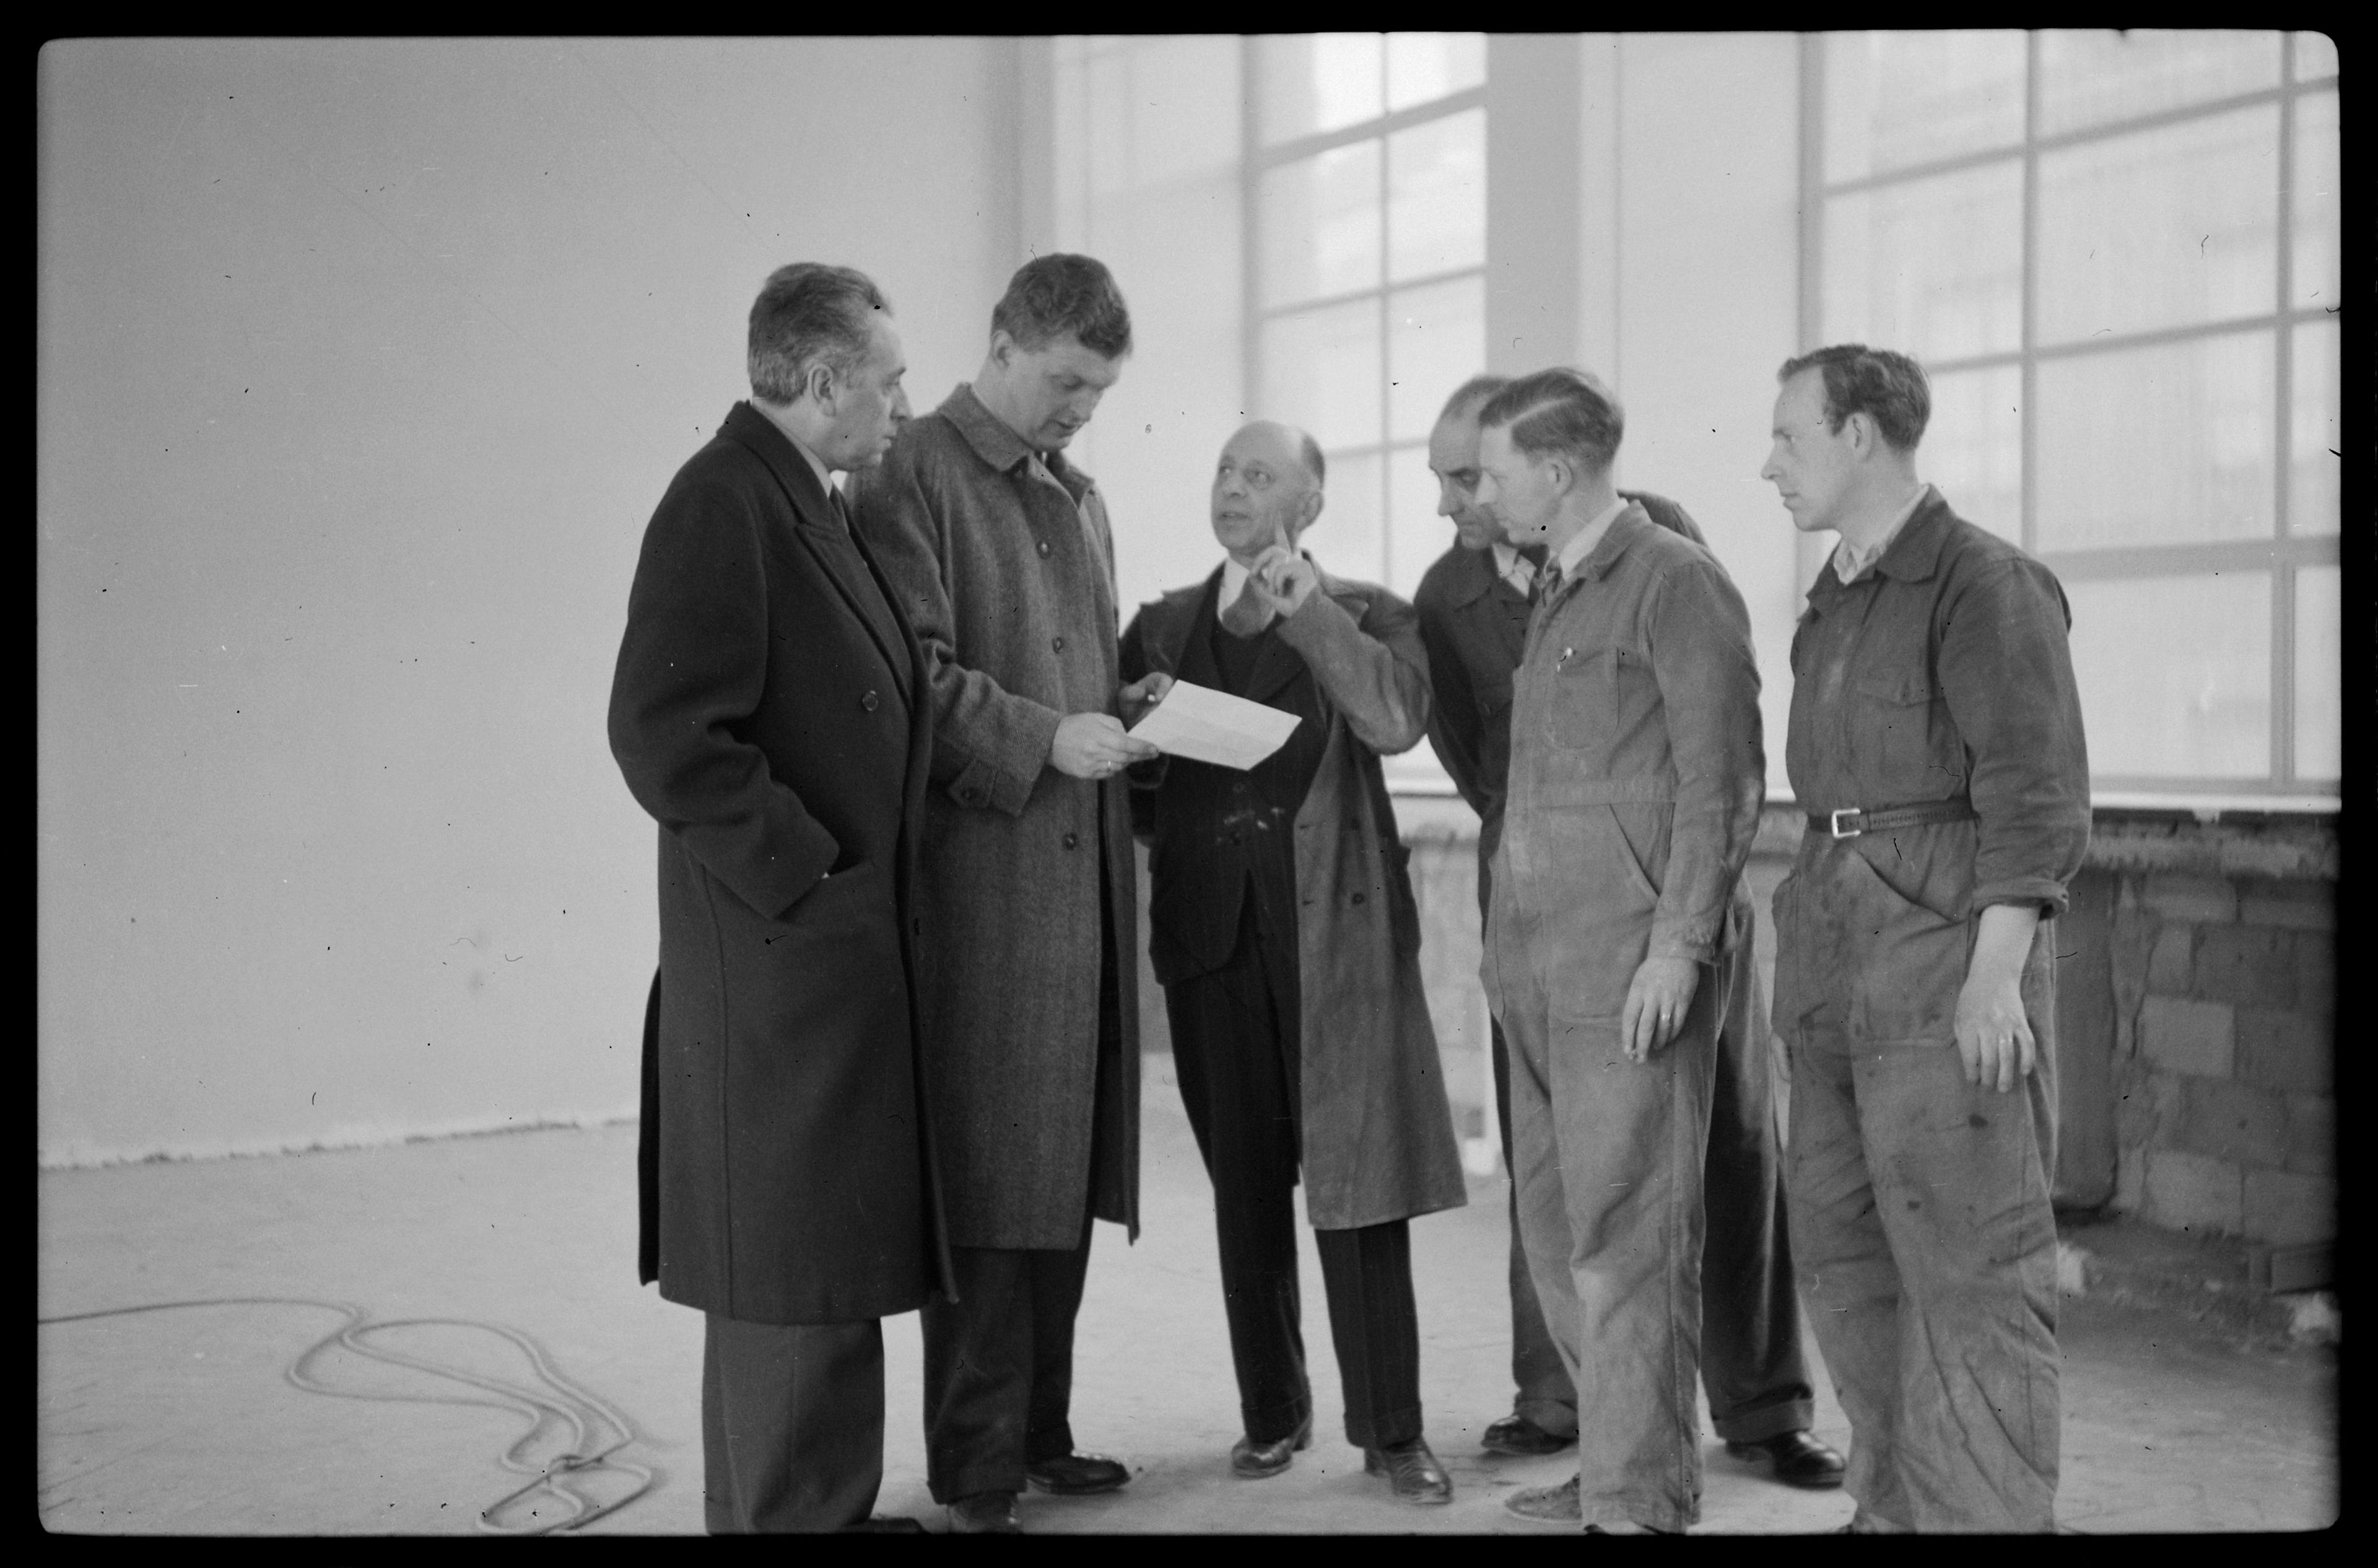 Staff members at Firma W.H. Gispen, c. 1951. File: Various glass negatives. W.H. Gispen archive. Collection Nieuwe Instituut, GISP 133 